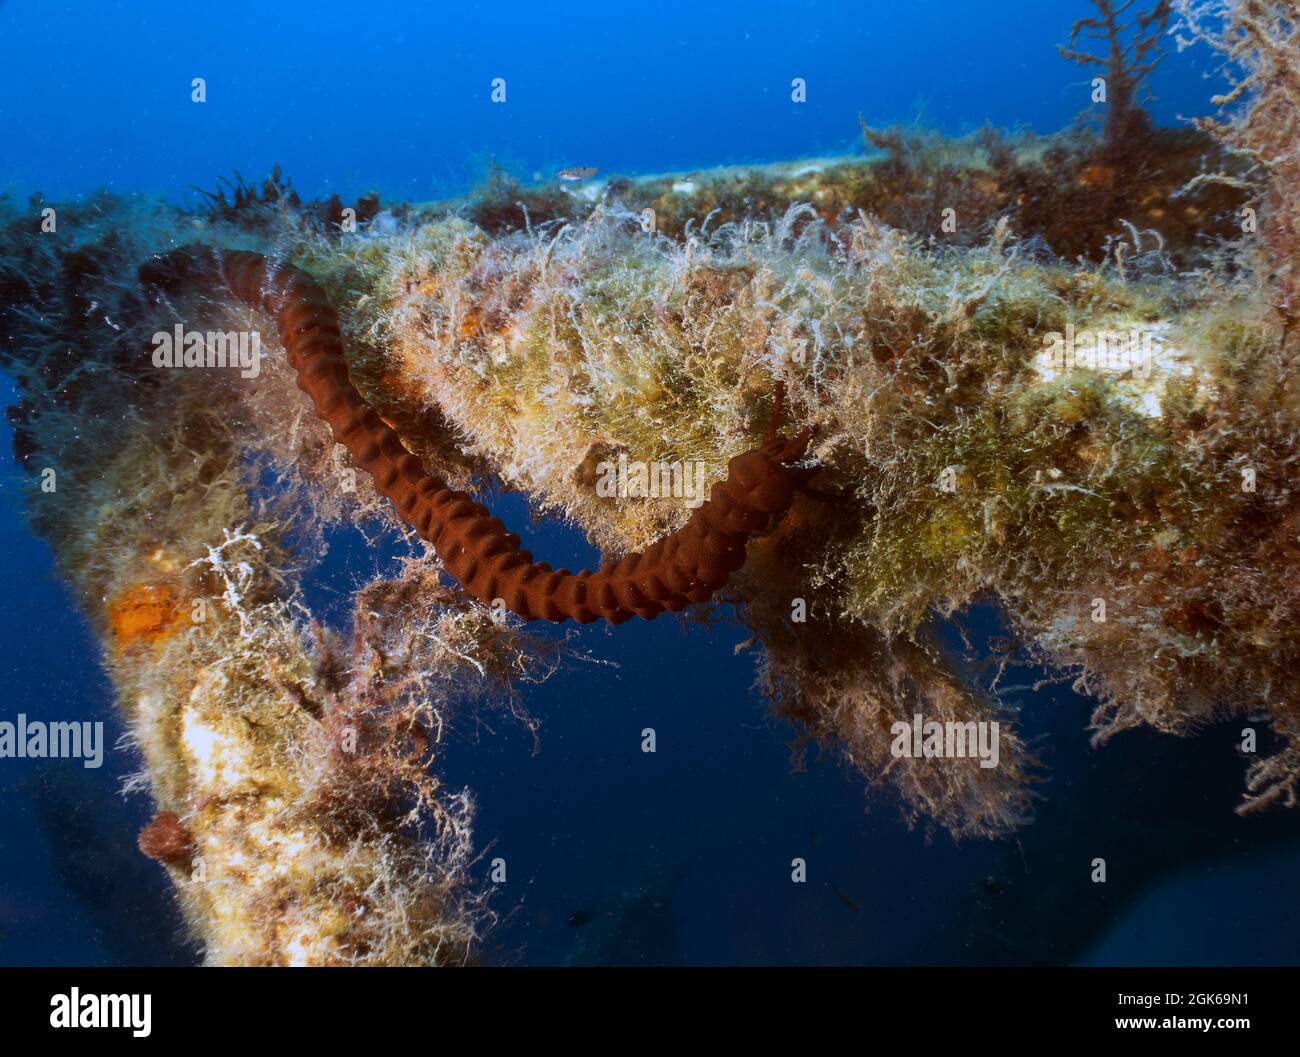 The Synaptula reciprocans sea cucumber was only discovered in the Mediterranean Sea in 1986. This specimen was found in Cyprus. Stock Photo